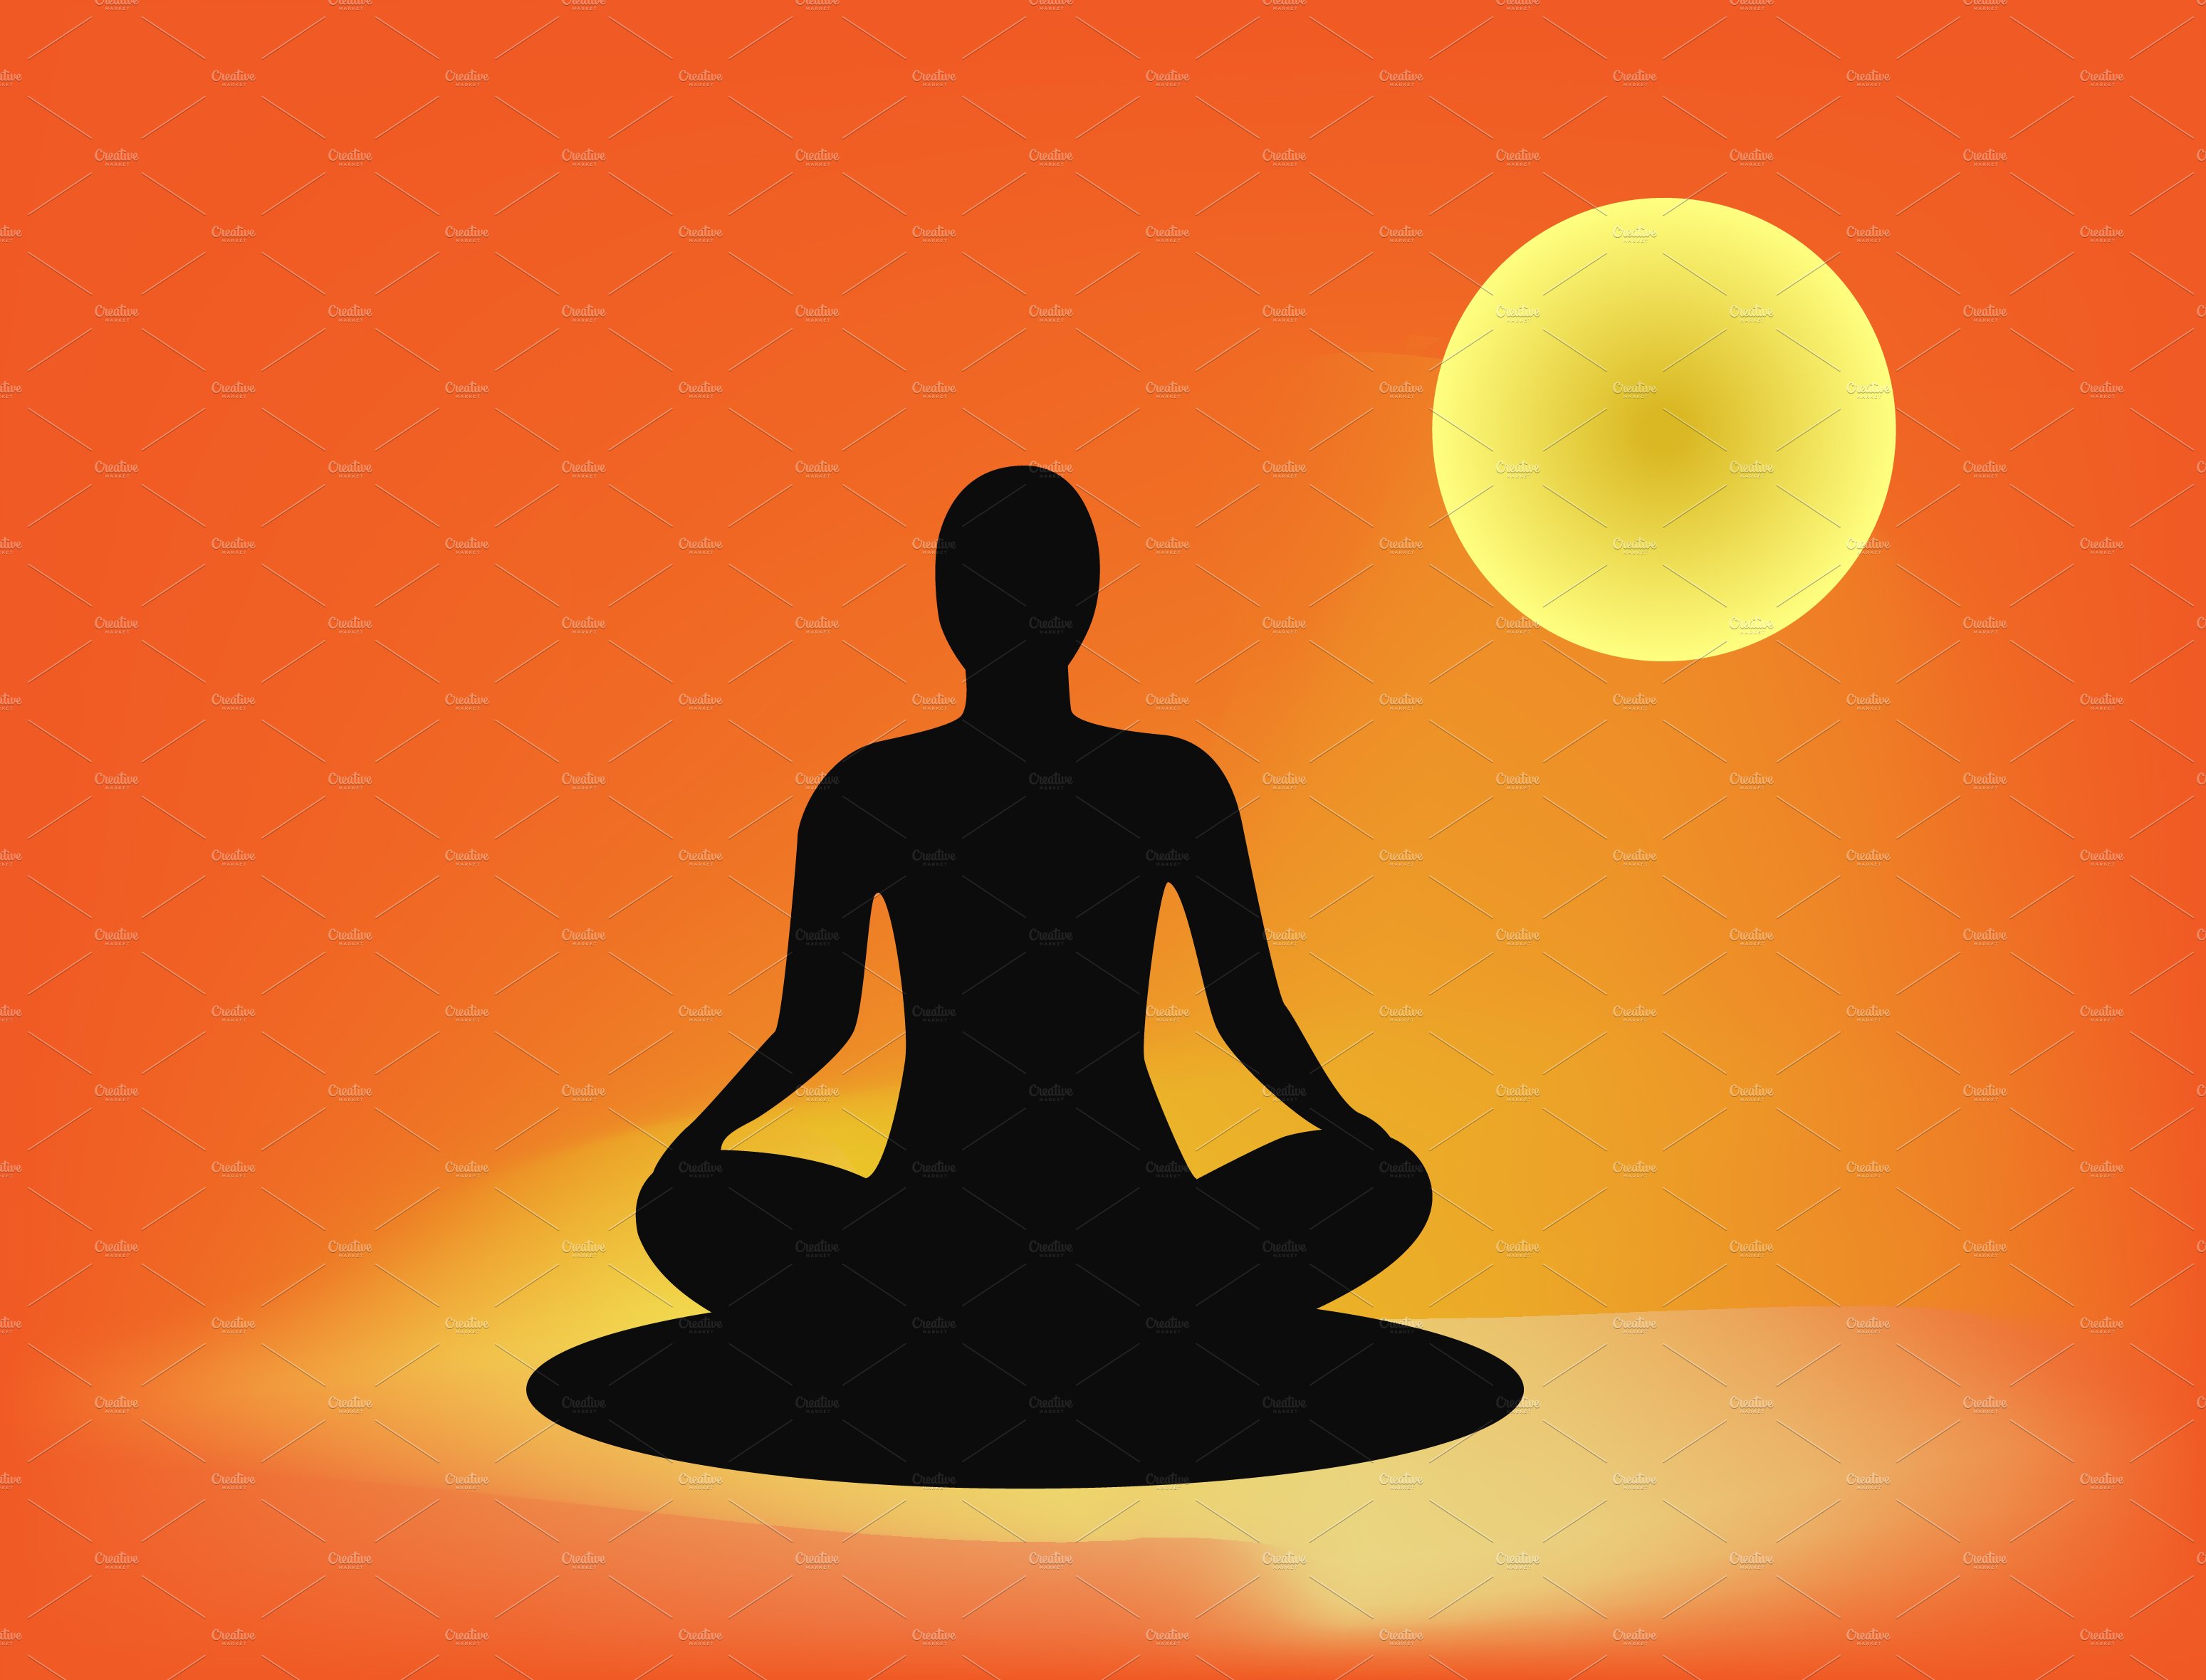 Silhouette meditating at sunset cover image.